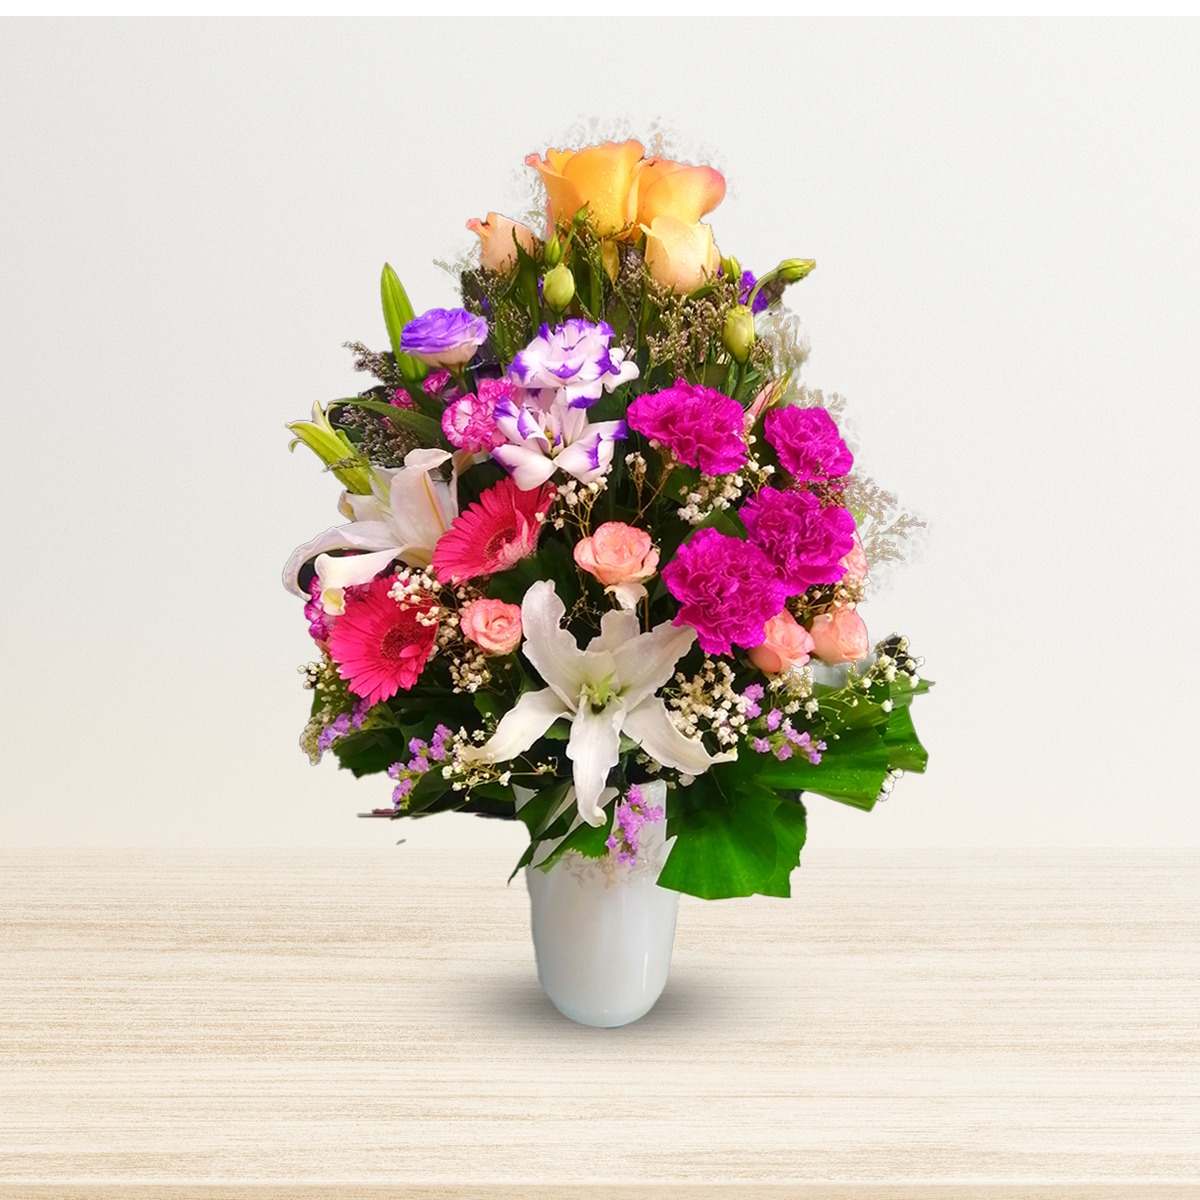 Lovely  Flower Bouquet With Ceramic Pot For Special One